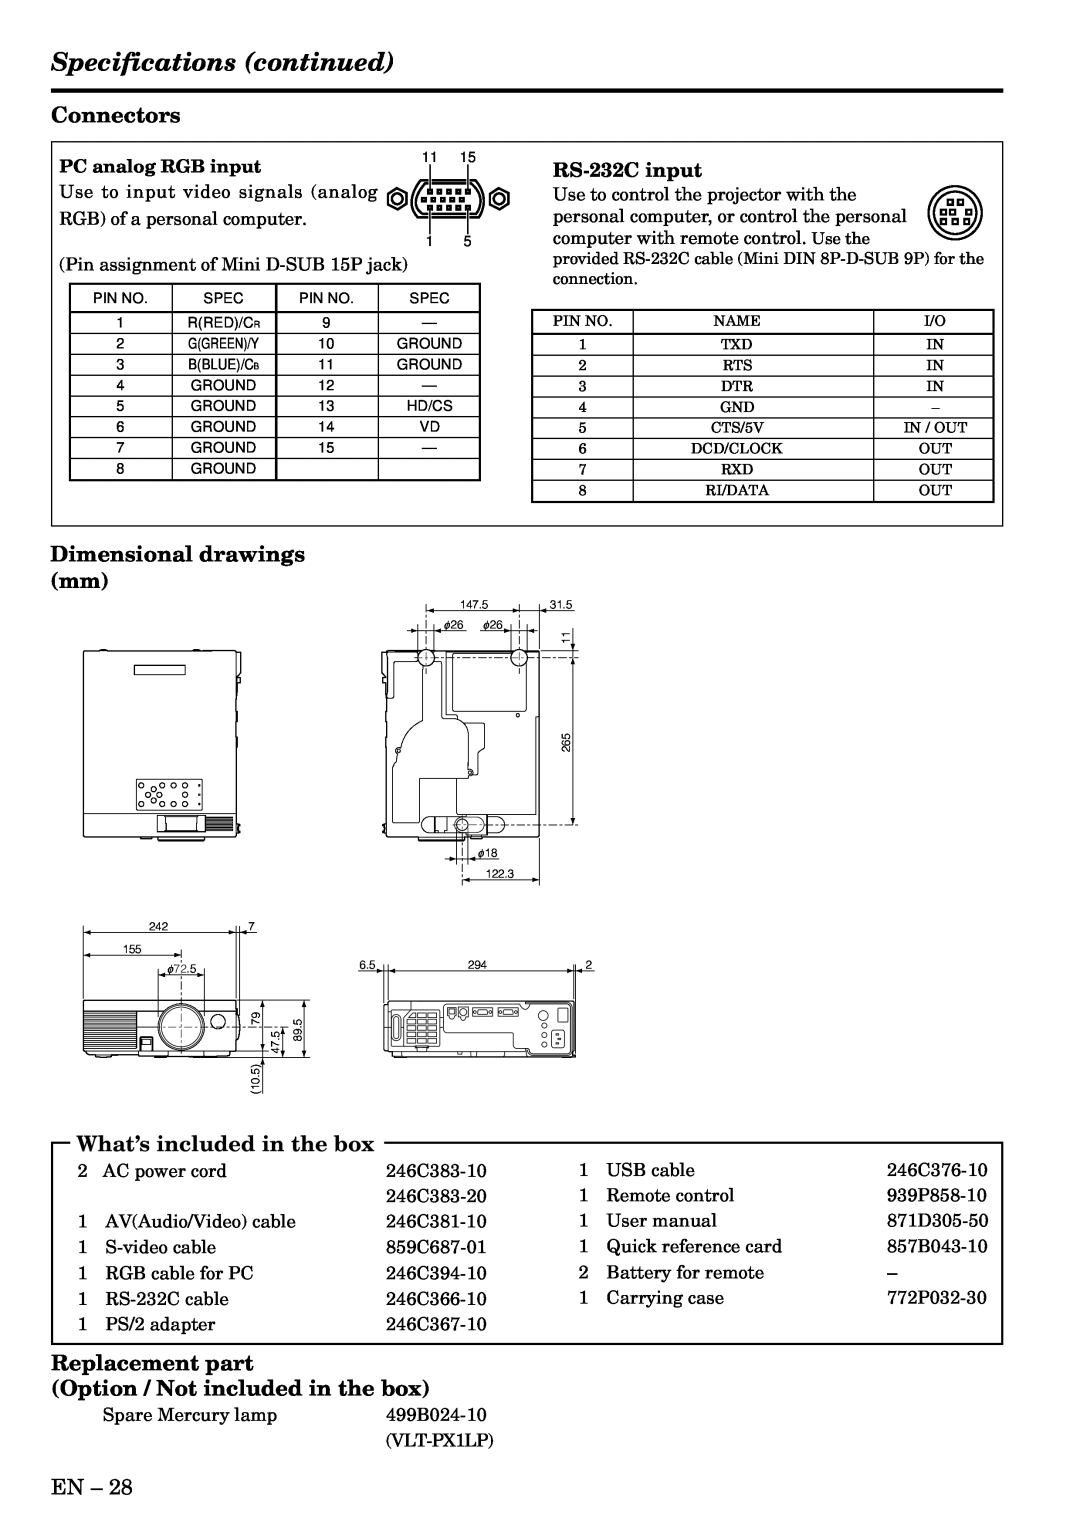 Mitsubishi Electronics X70B Specifications continued, Connectors, Dimensional drawings mm, What’s included in the box 